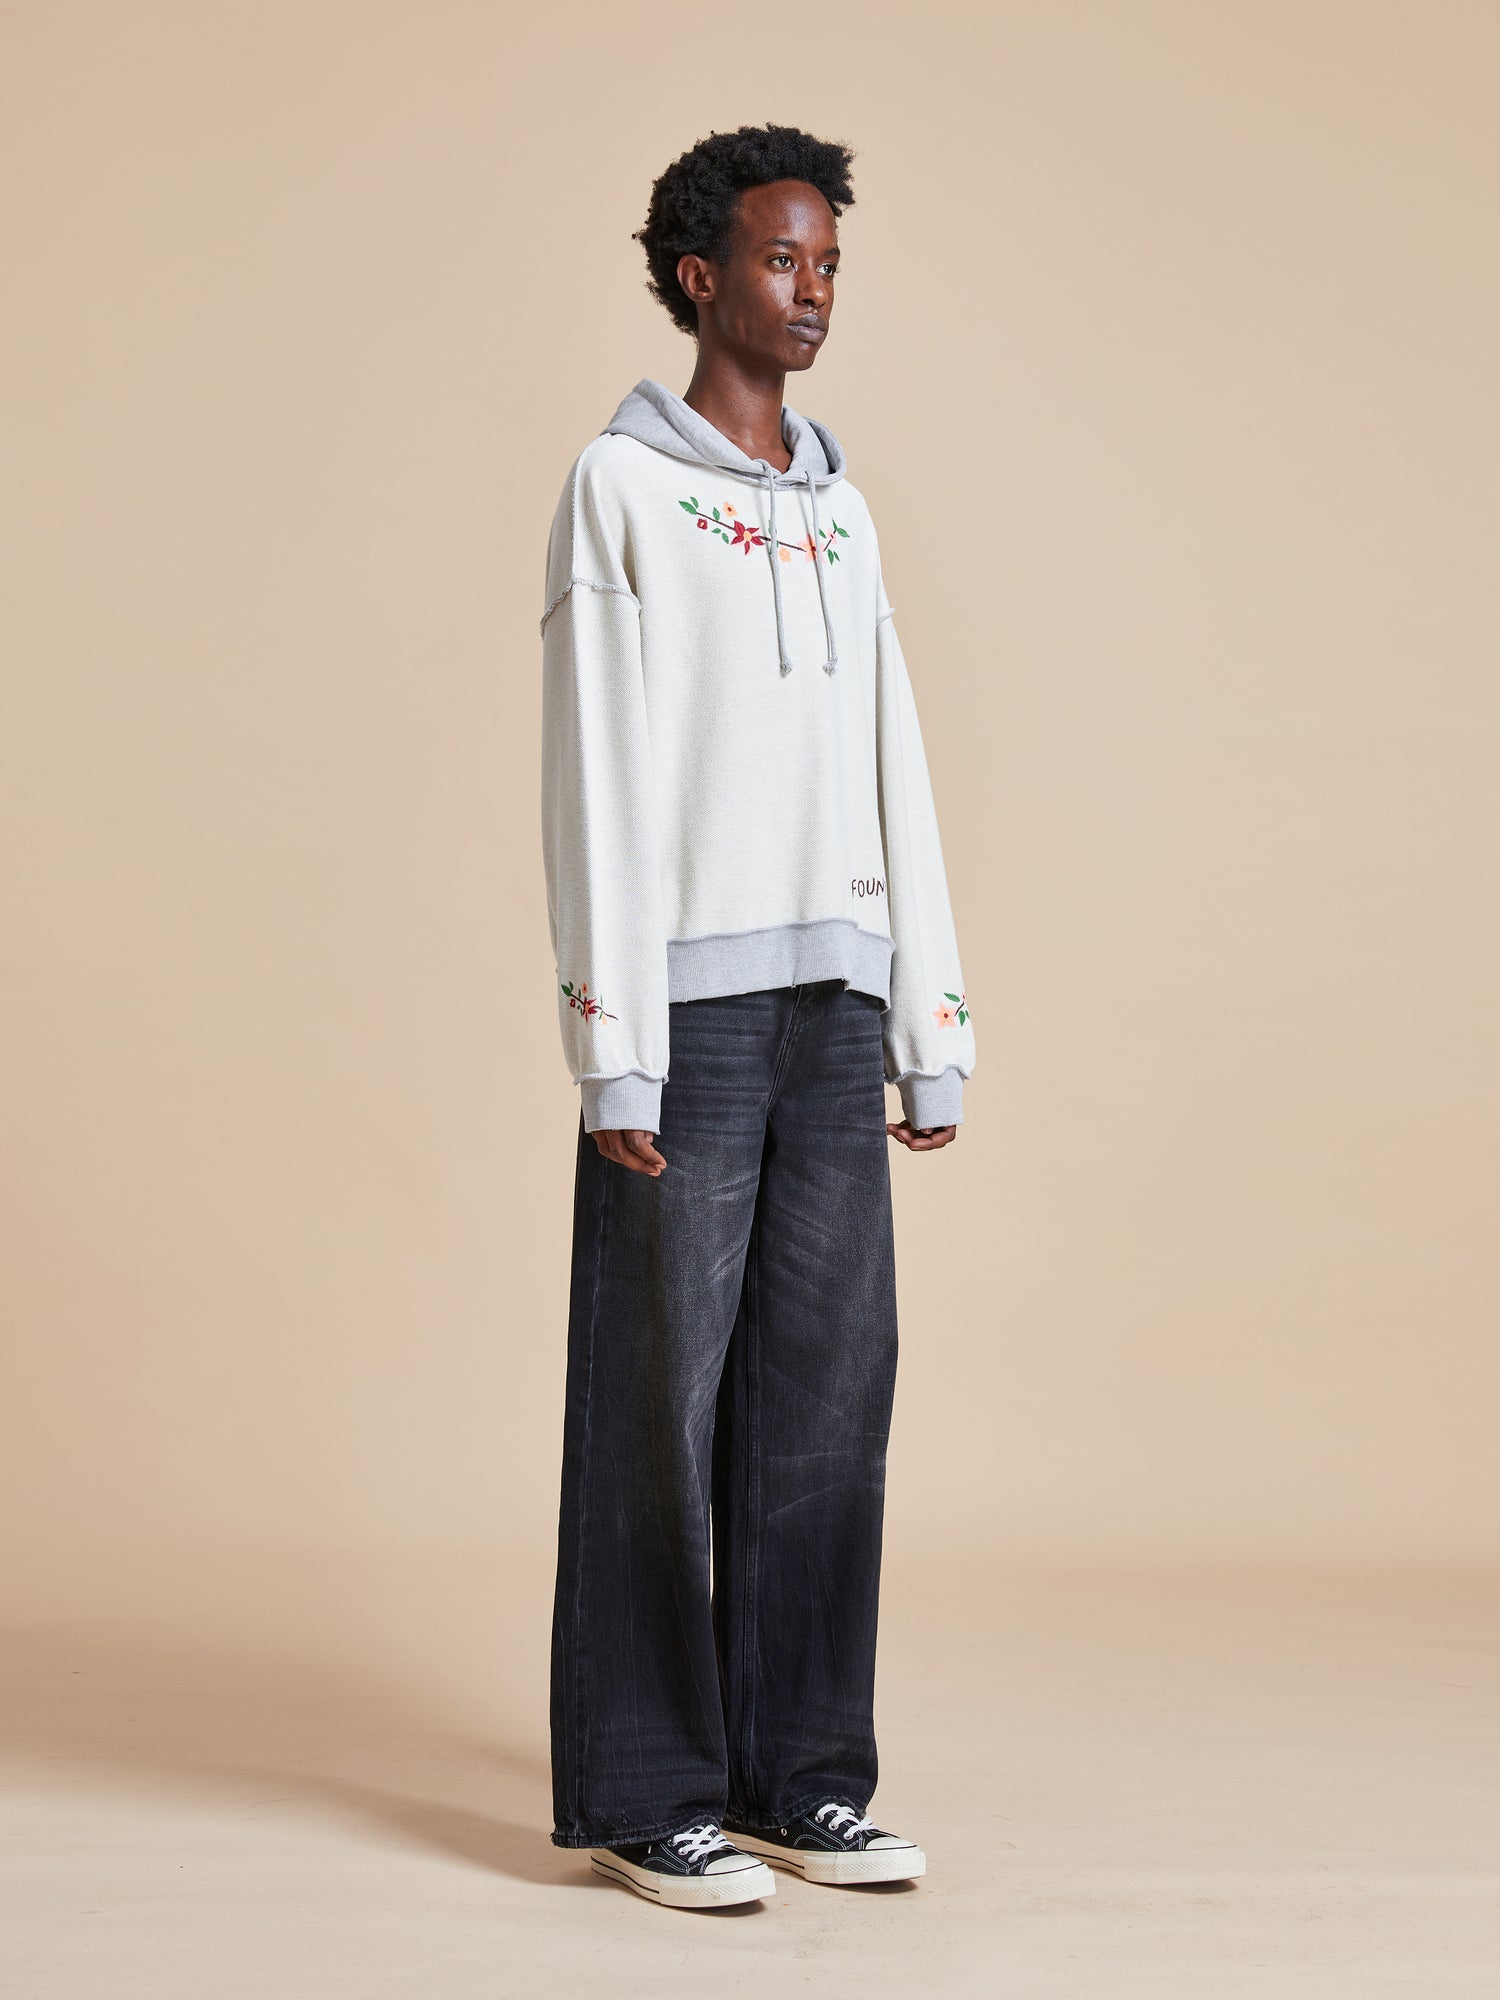 The model is wearing a white Inverse Flower Petal Hoodie and black wide leg pants.